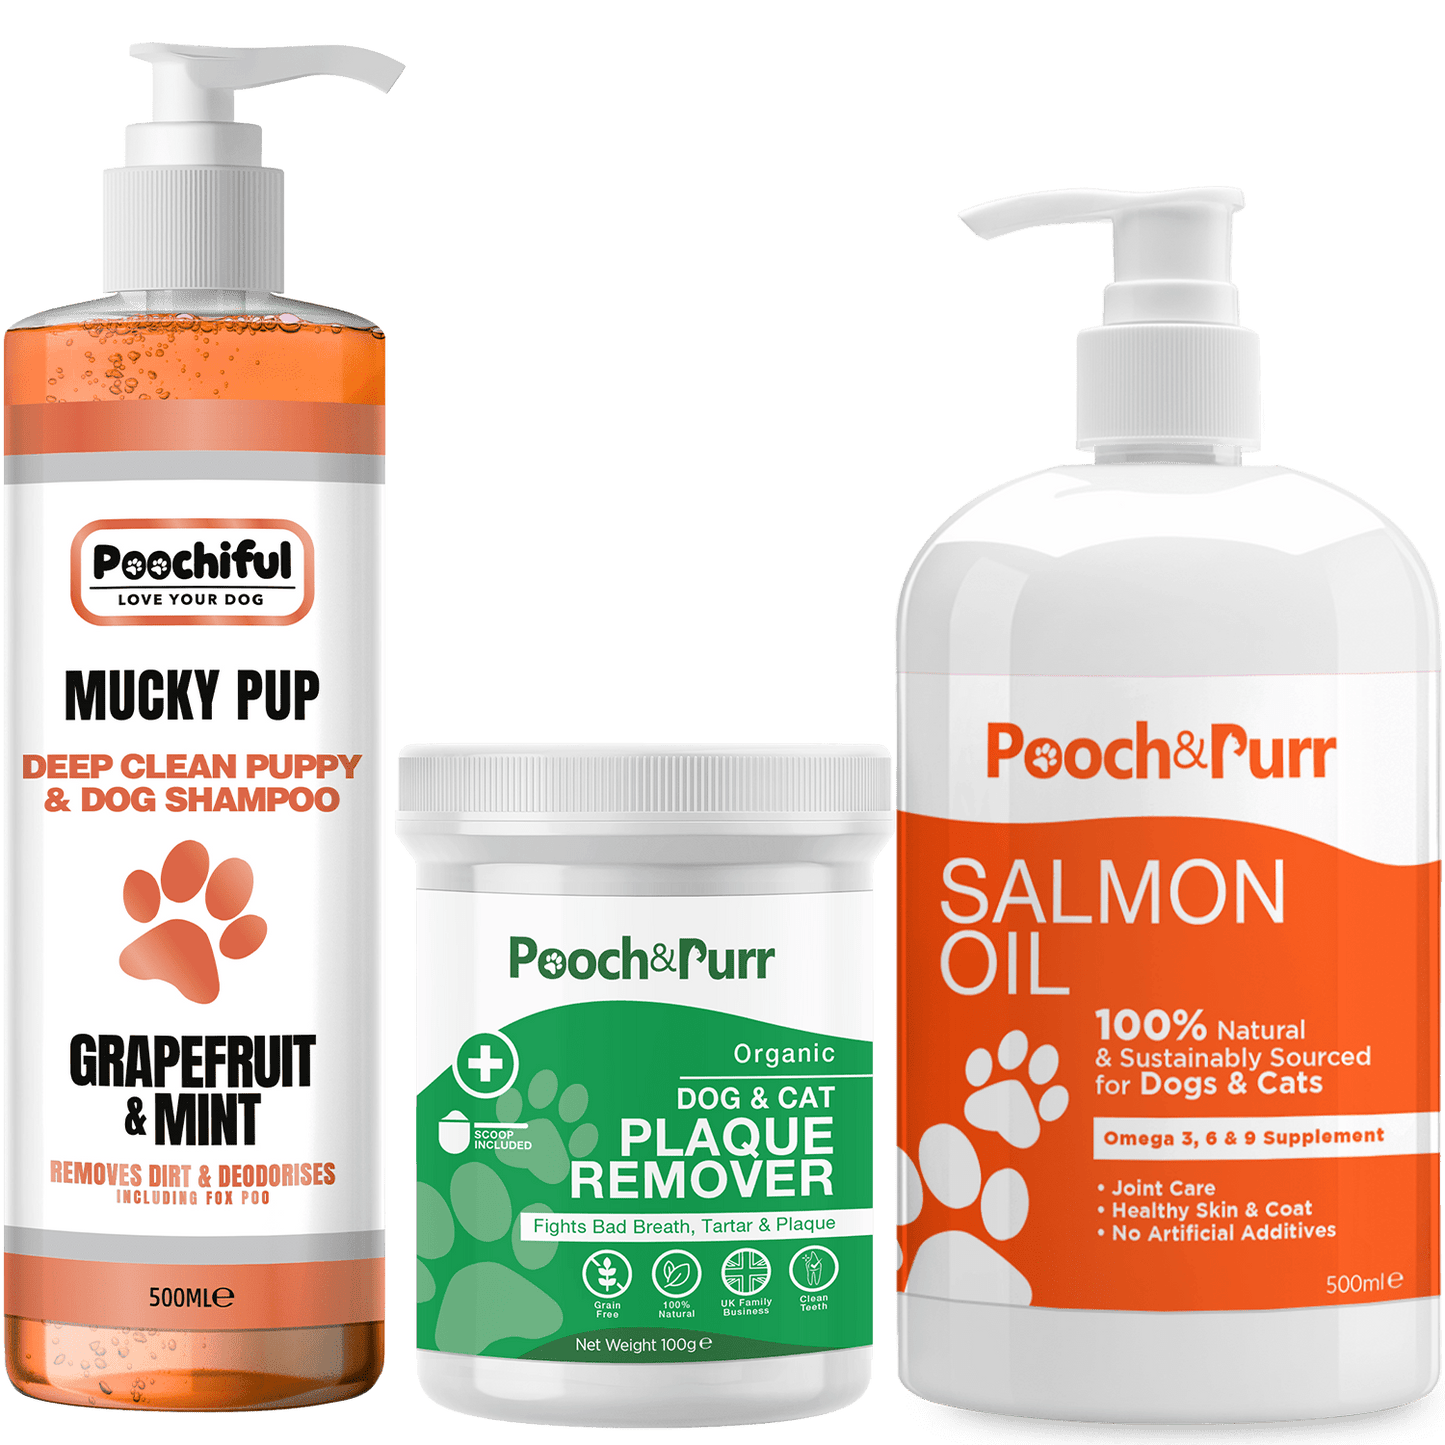 Mucky Pup 500ml + Pooch And Purr Salmon Oil 500ml + Plaque Powder 100g Bundle